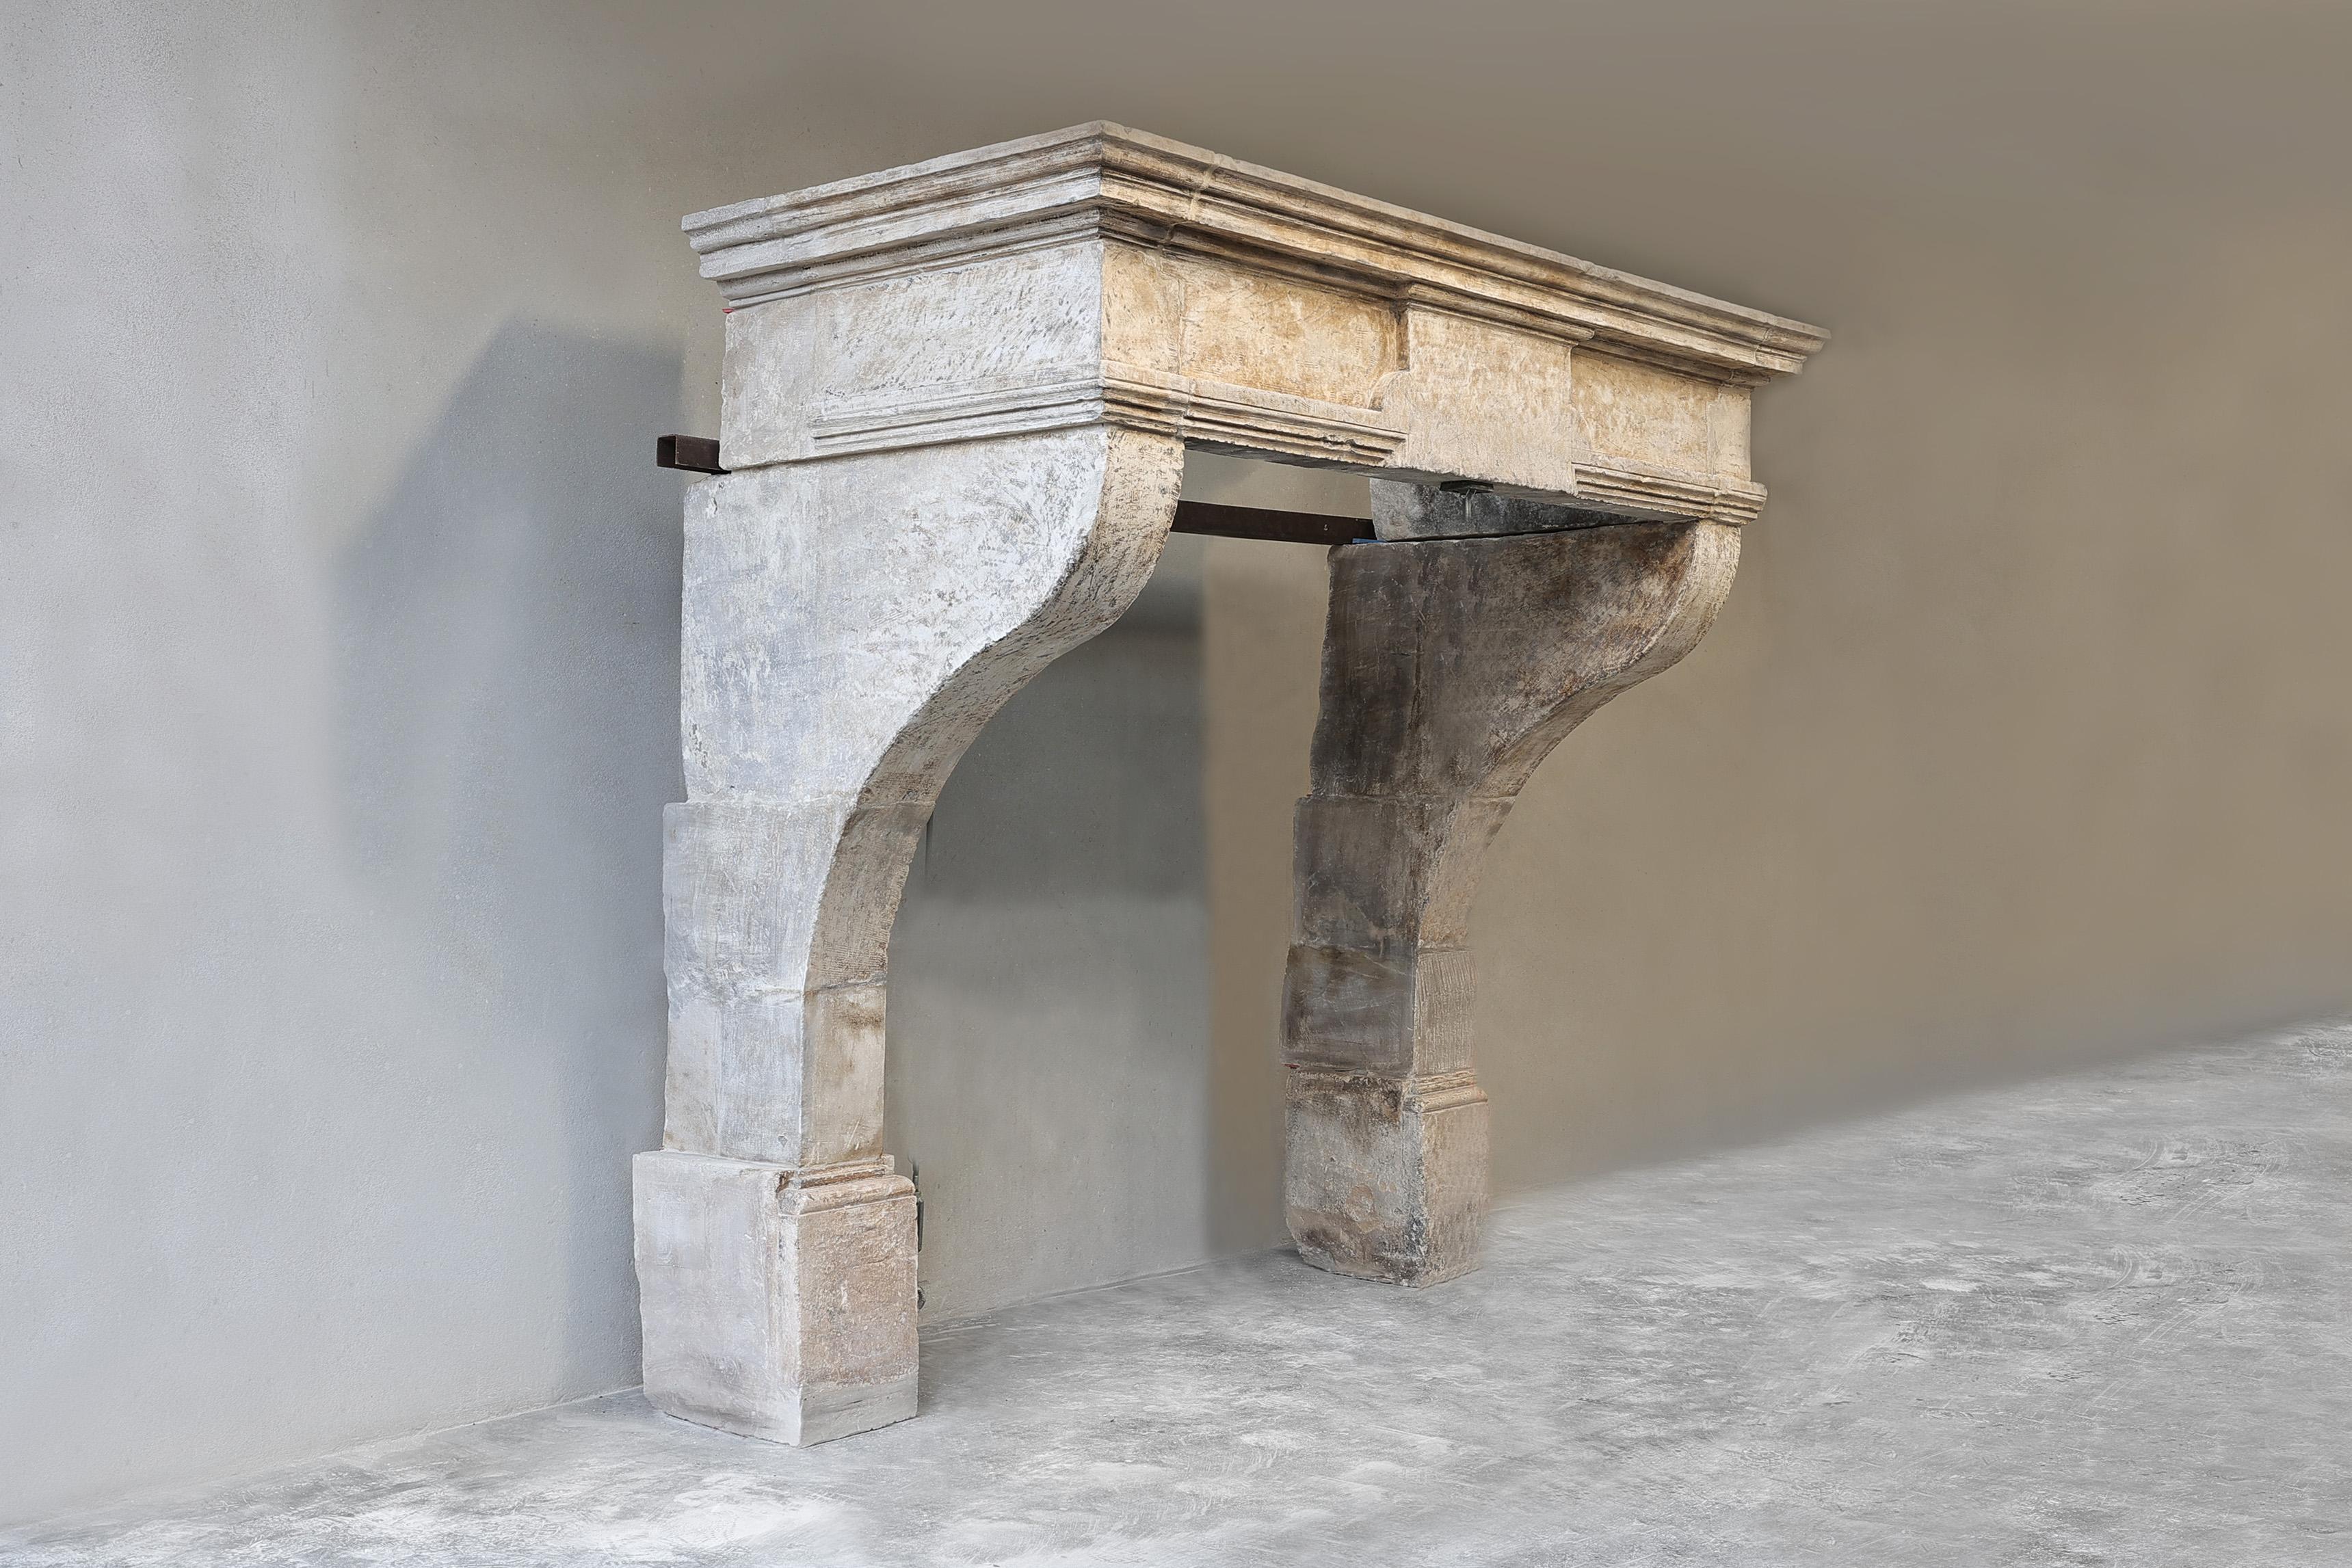 Beautiful robust antique mantelpiece made of French limestone from the 18th century in the style of Louis XIII. This antique French fireplace has a beautiful wide front section and curved legs and a high base. The warm color and appearance of this